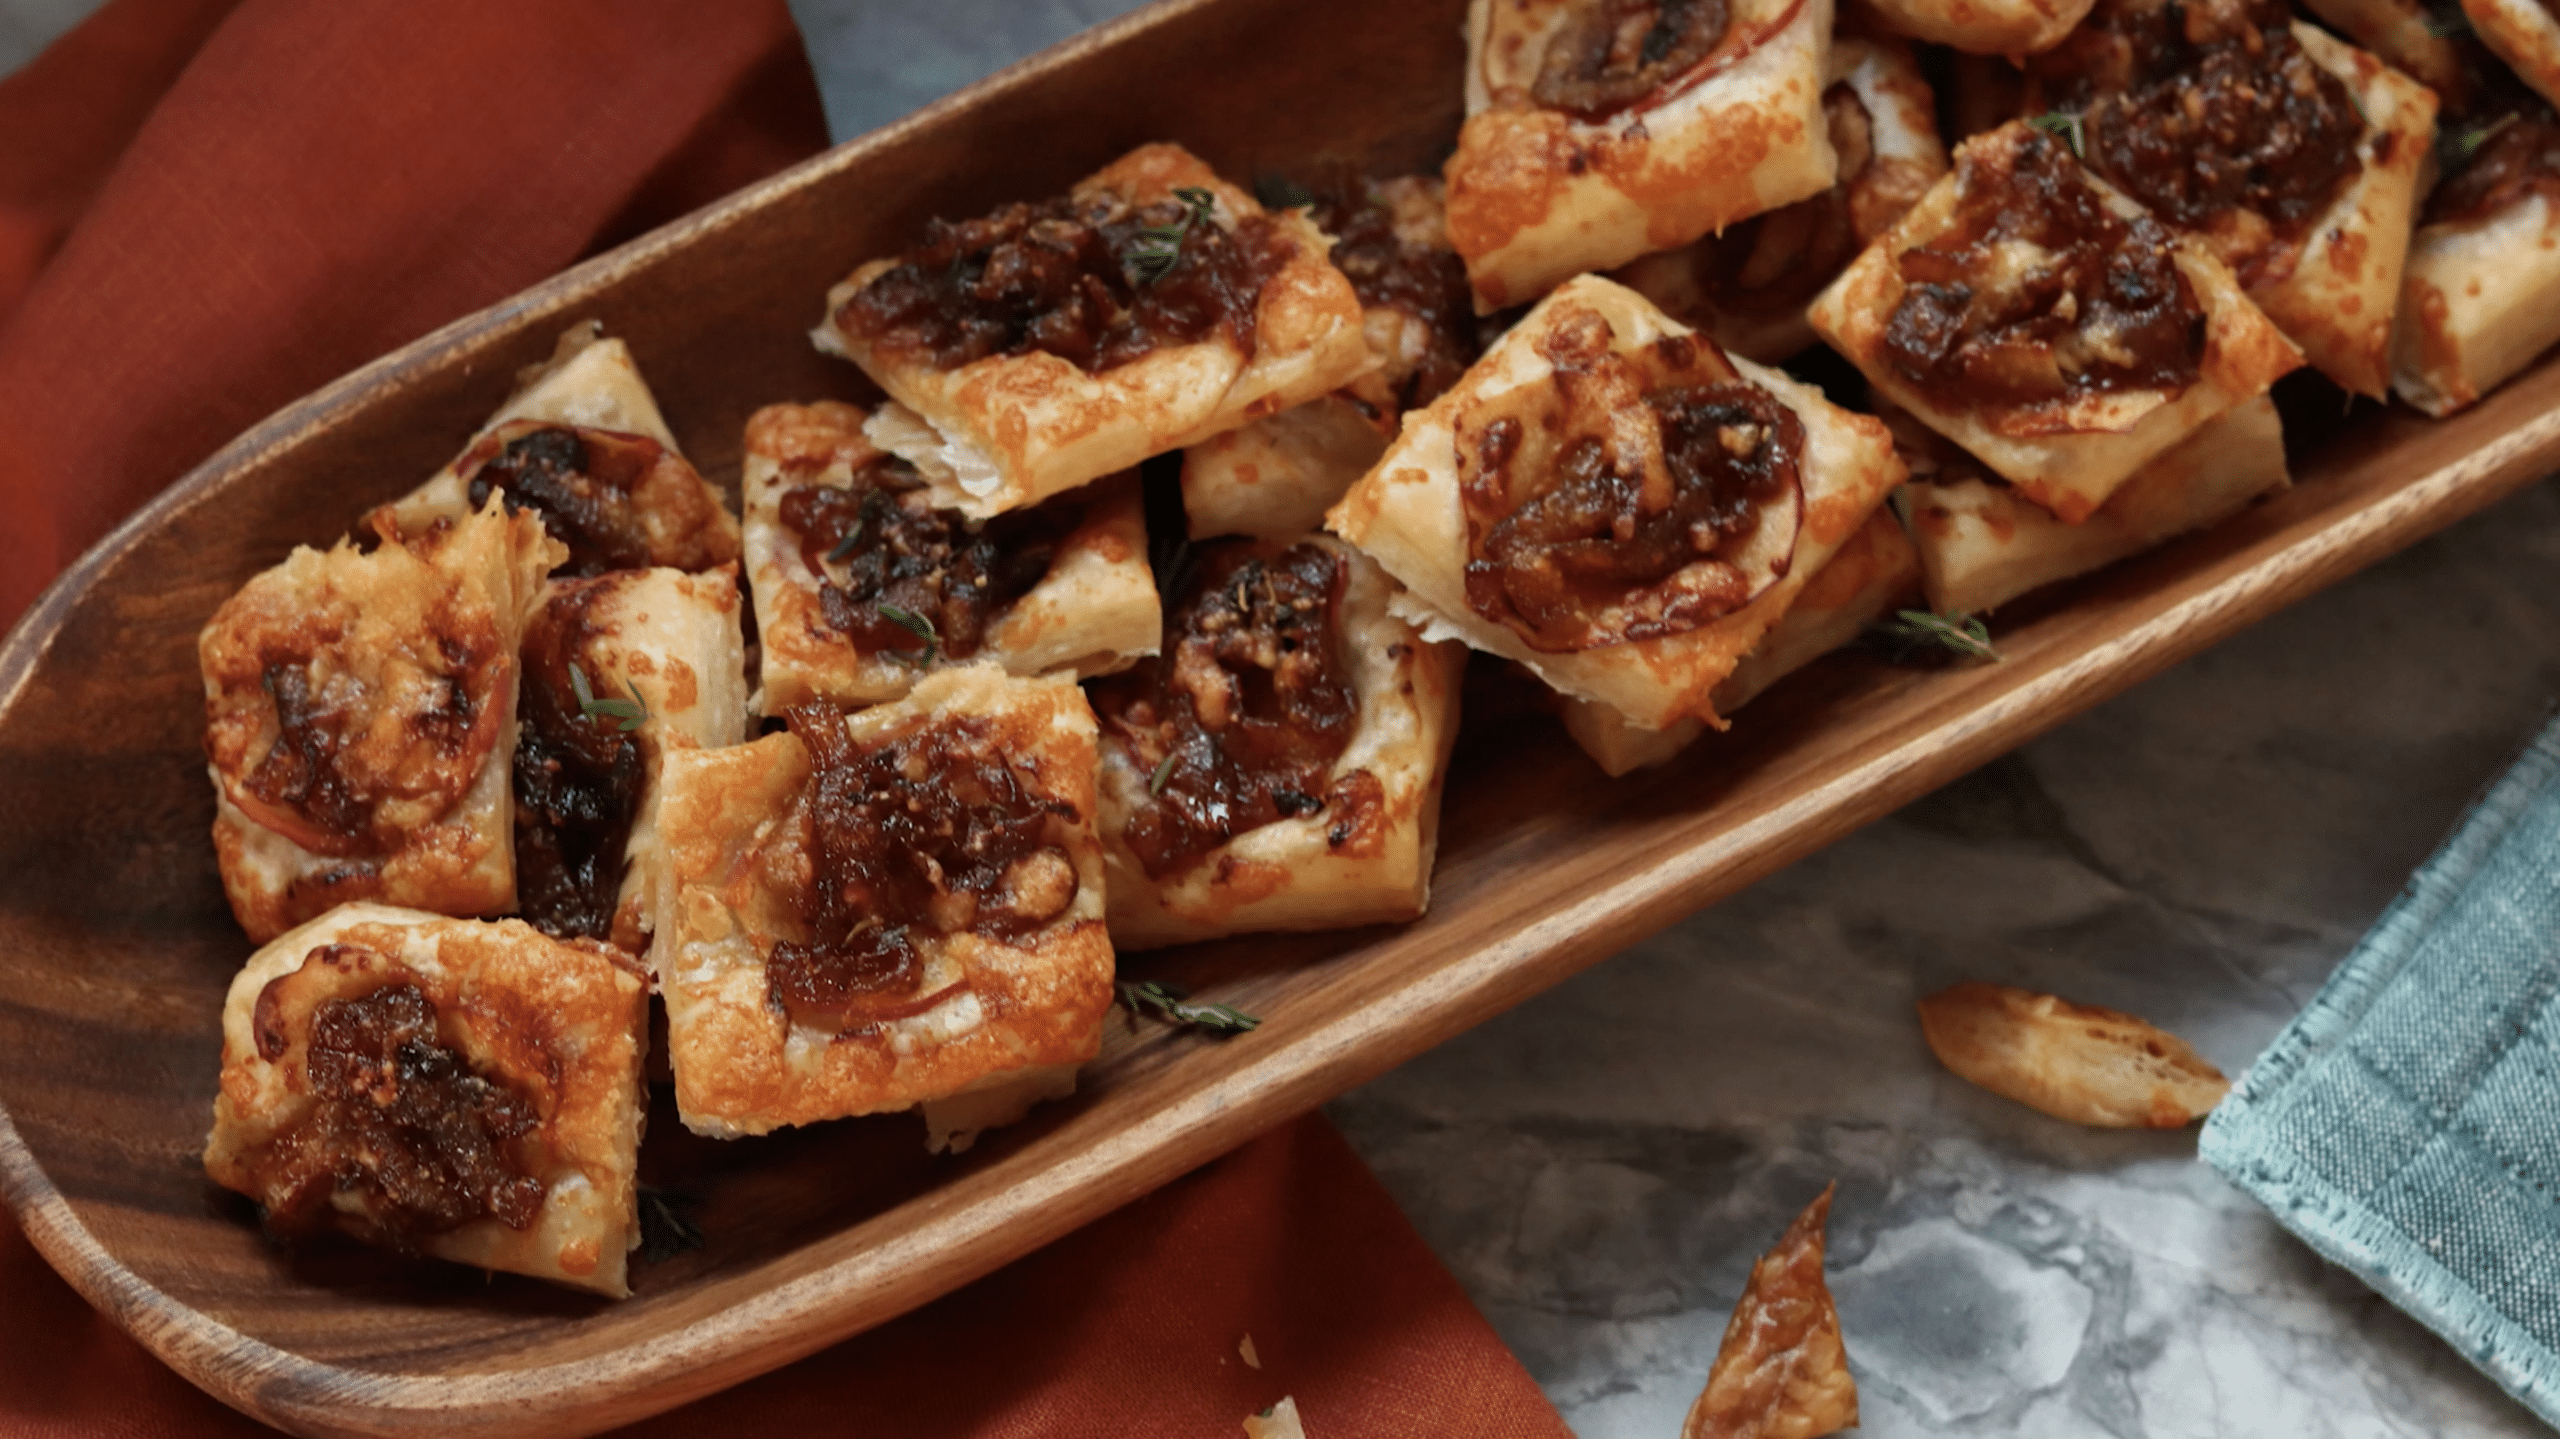 Apple Cheddar and Caramelized Onion Pastry Bites